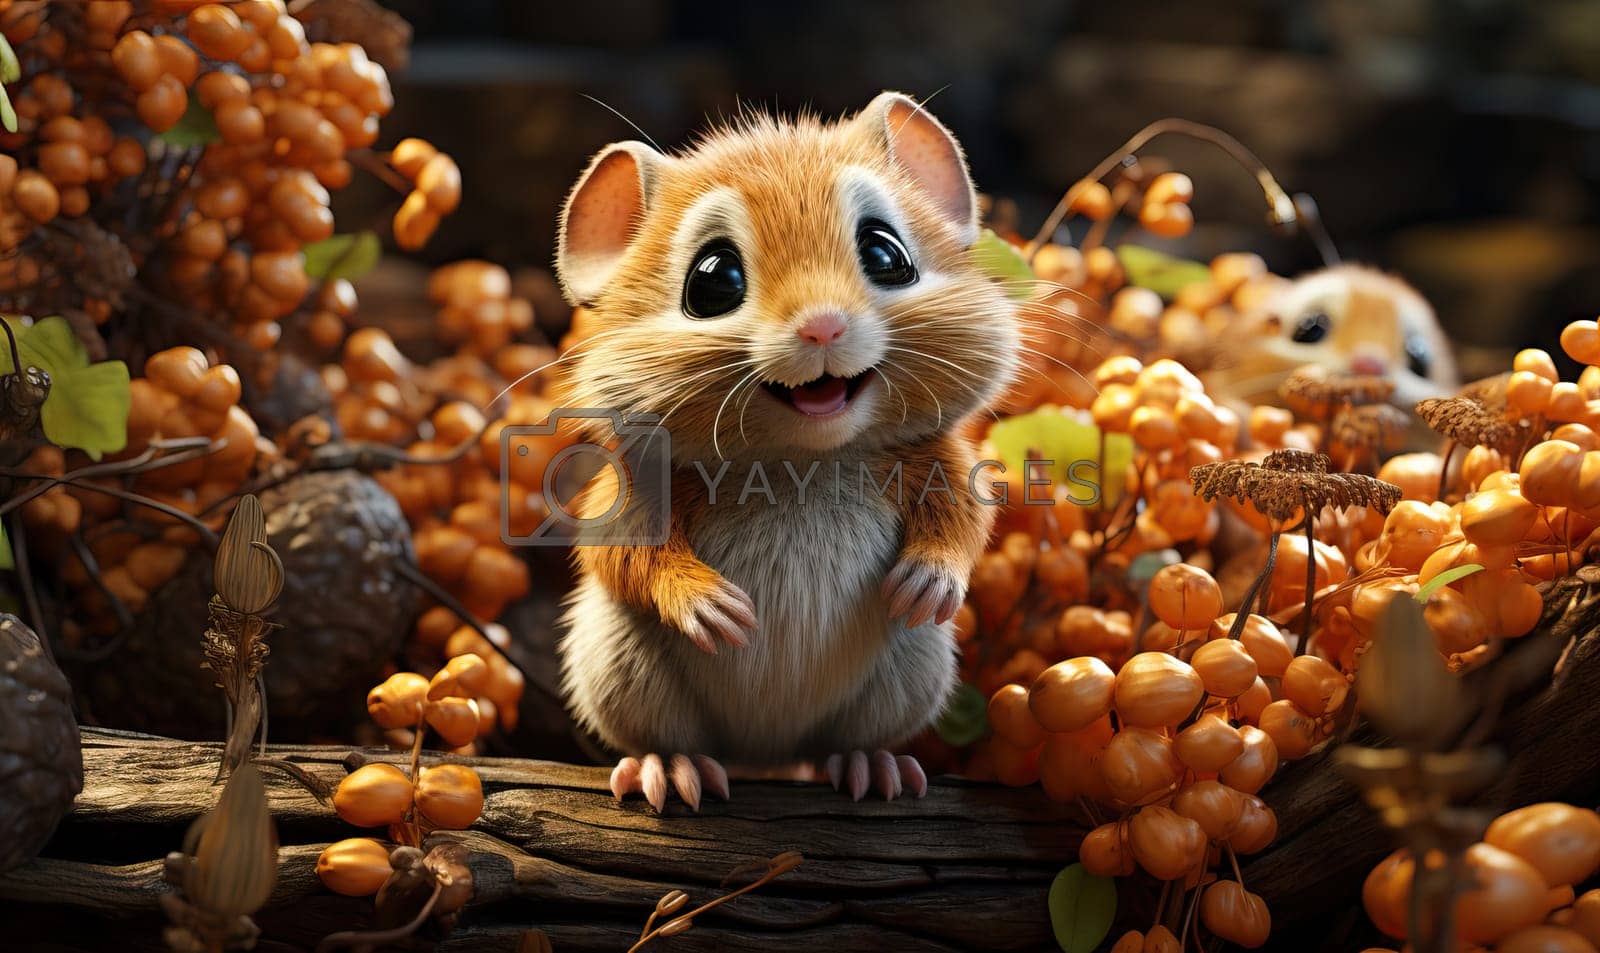 Royalty free image of Cartoon 3d hamster on an autumn background. by Fischeron